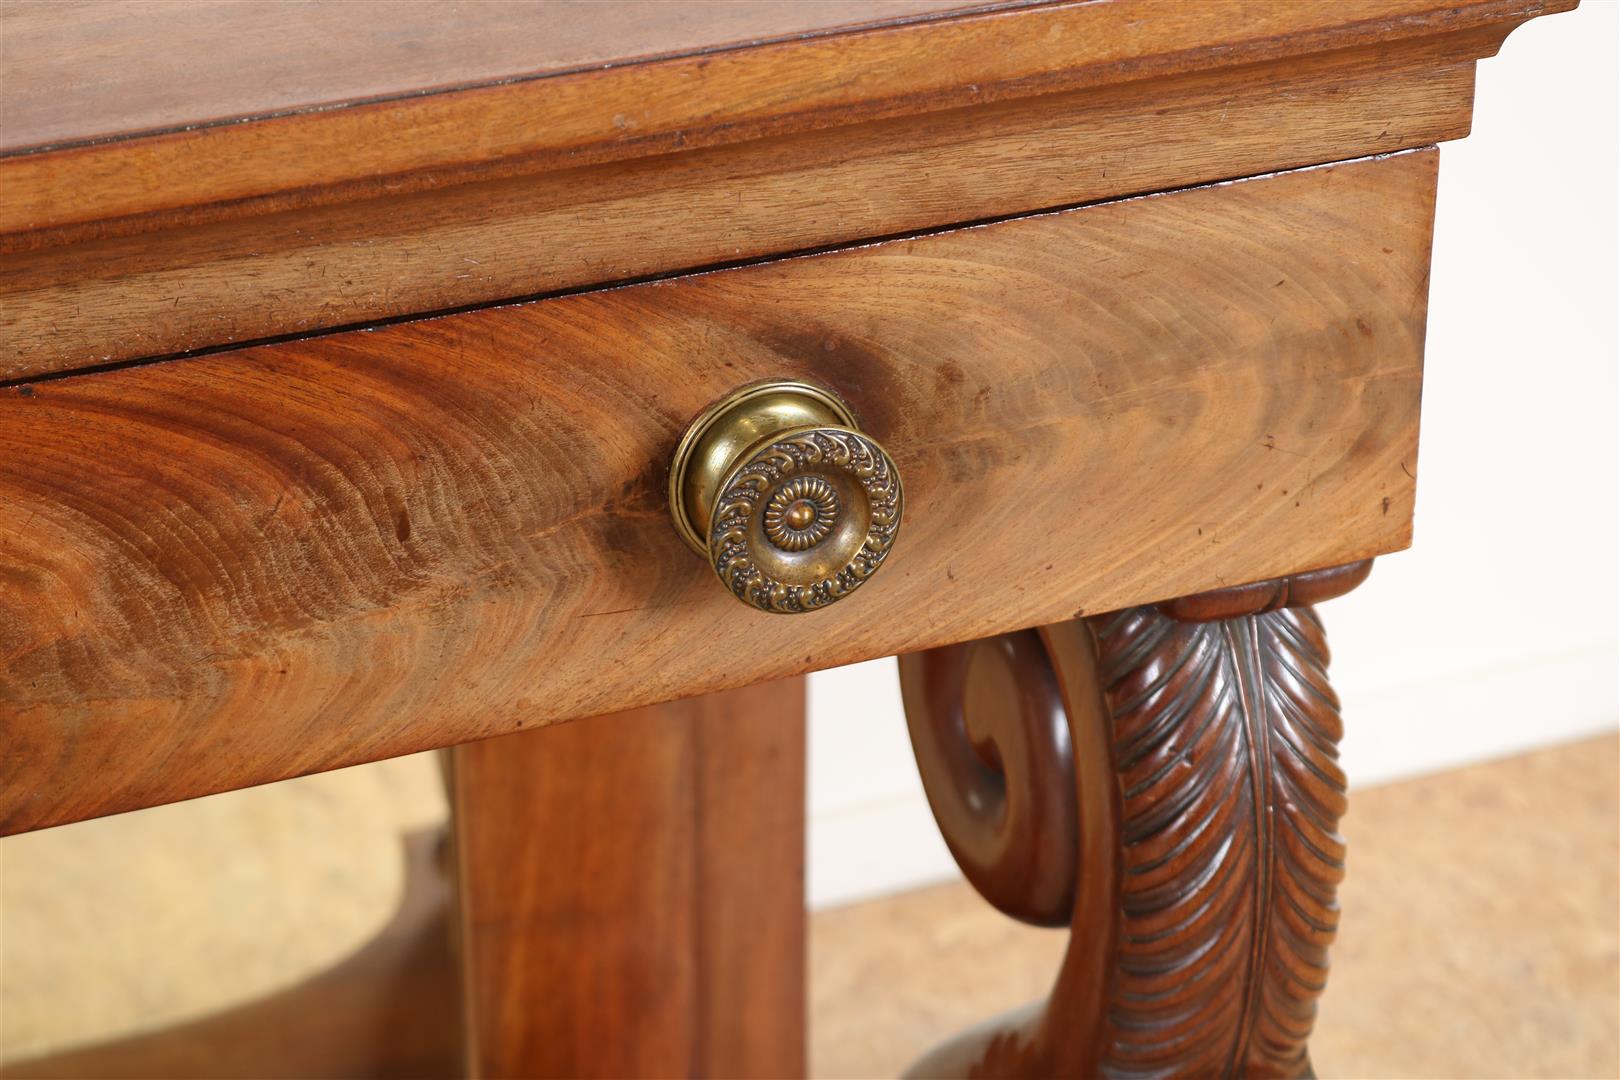 Mahogany Empire trumeau with plinth drawer on volutes with carved acanthus leaves, 2 side leaves and - Image 3 of 8